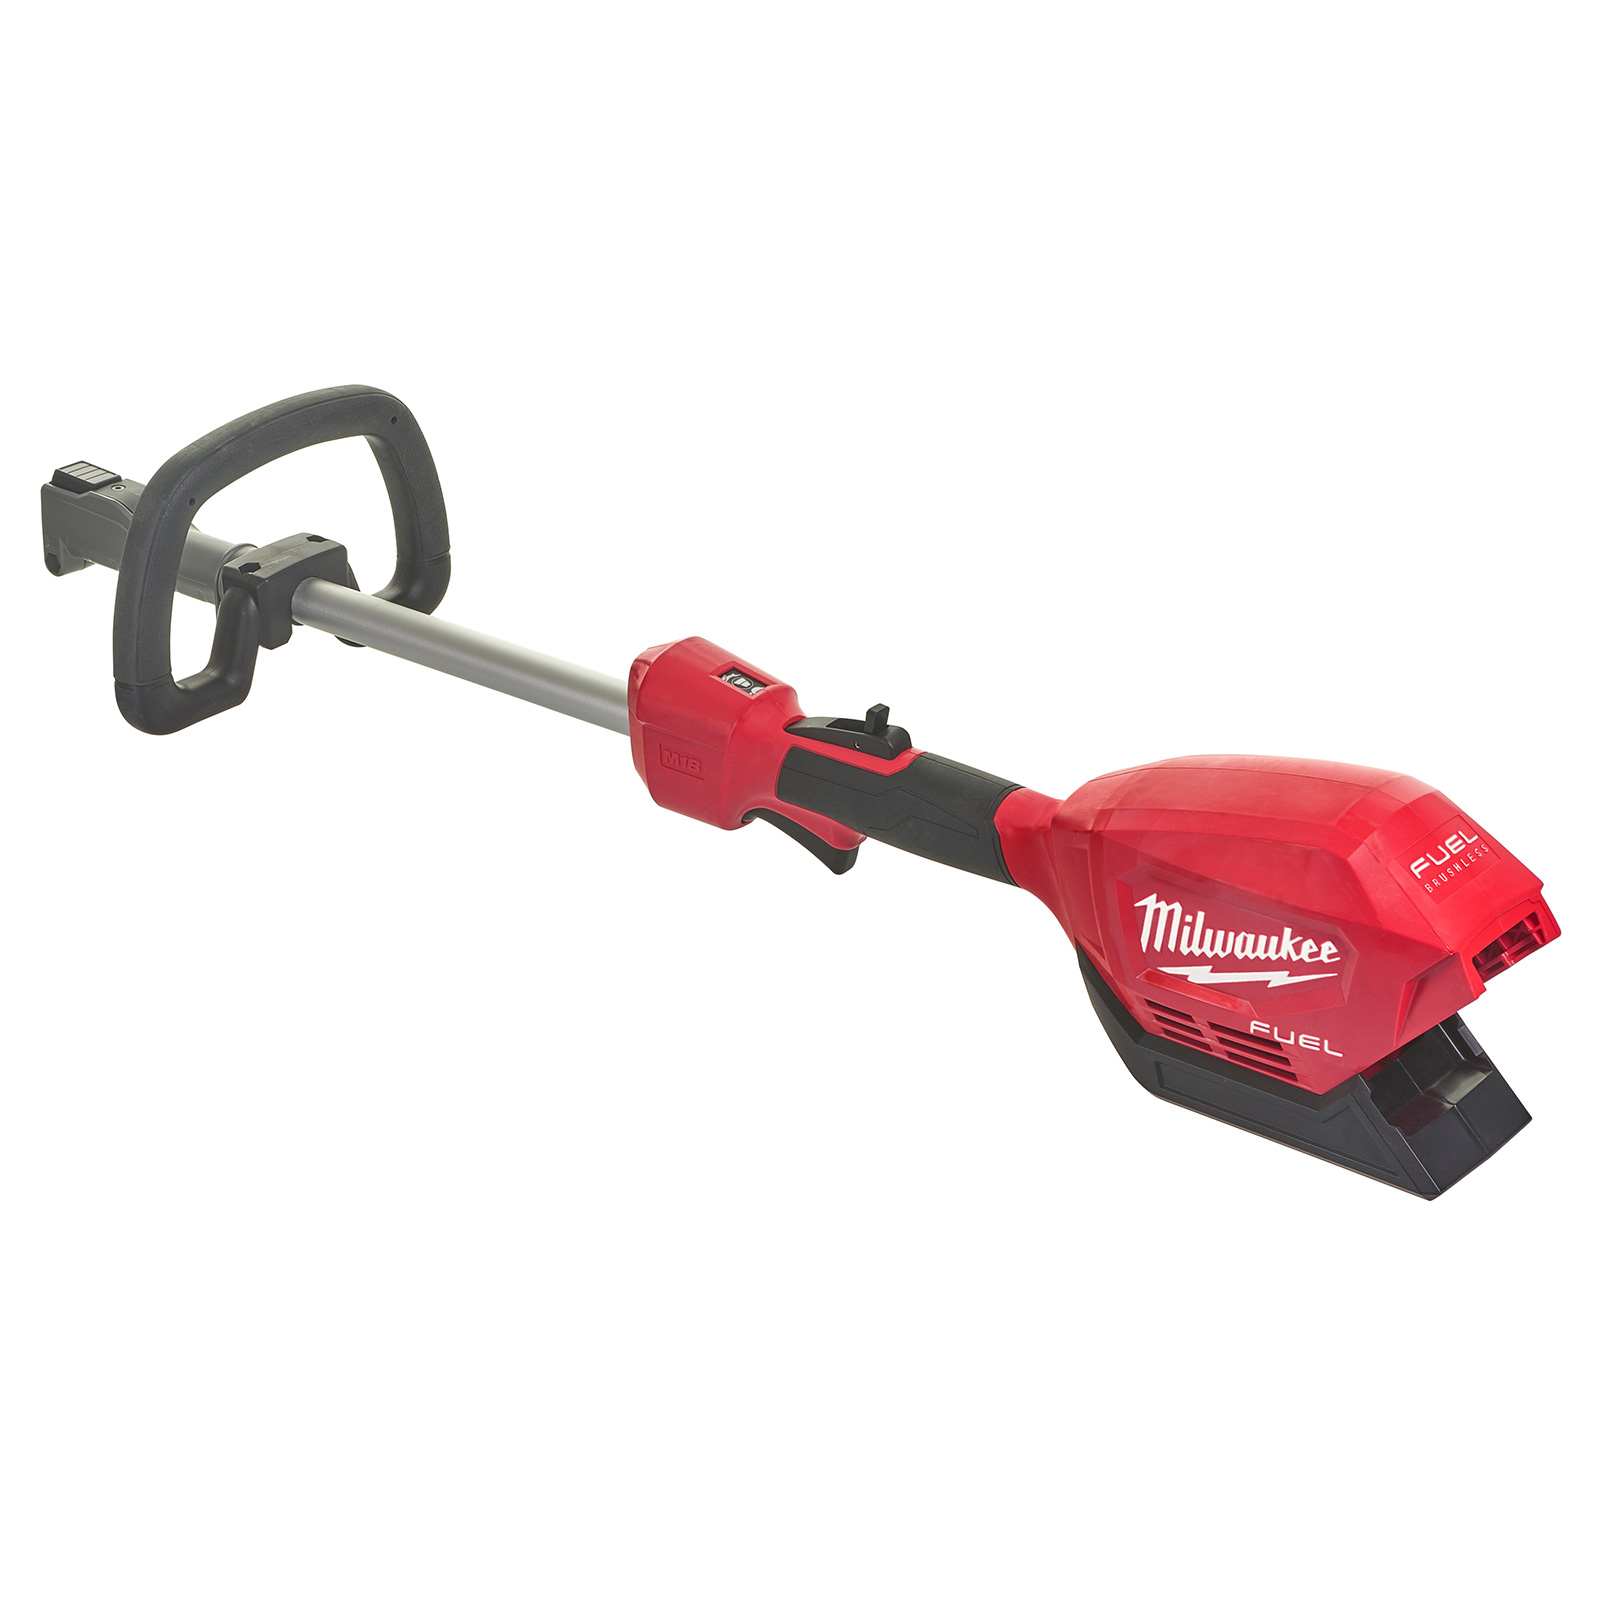 Milwaukee 18V Fuel Brushless Outdoor Power Head (tool only) M18FOPH-0